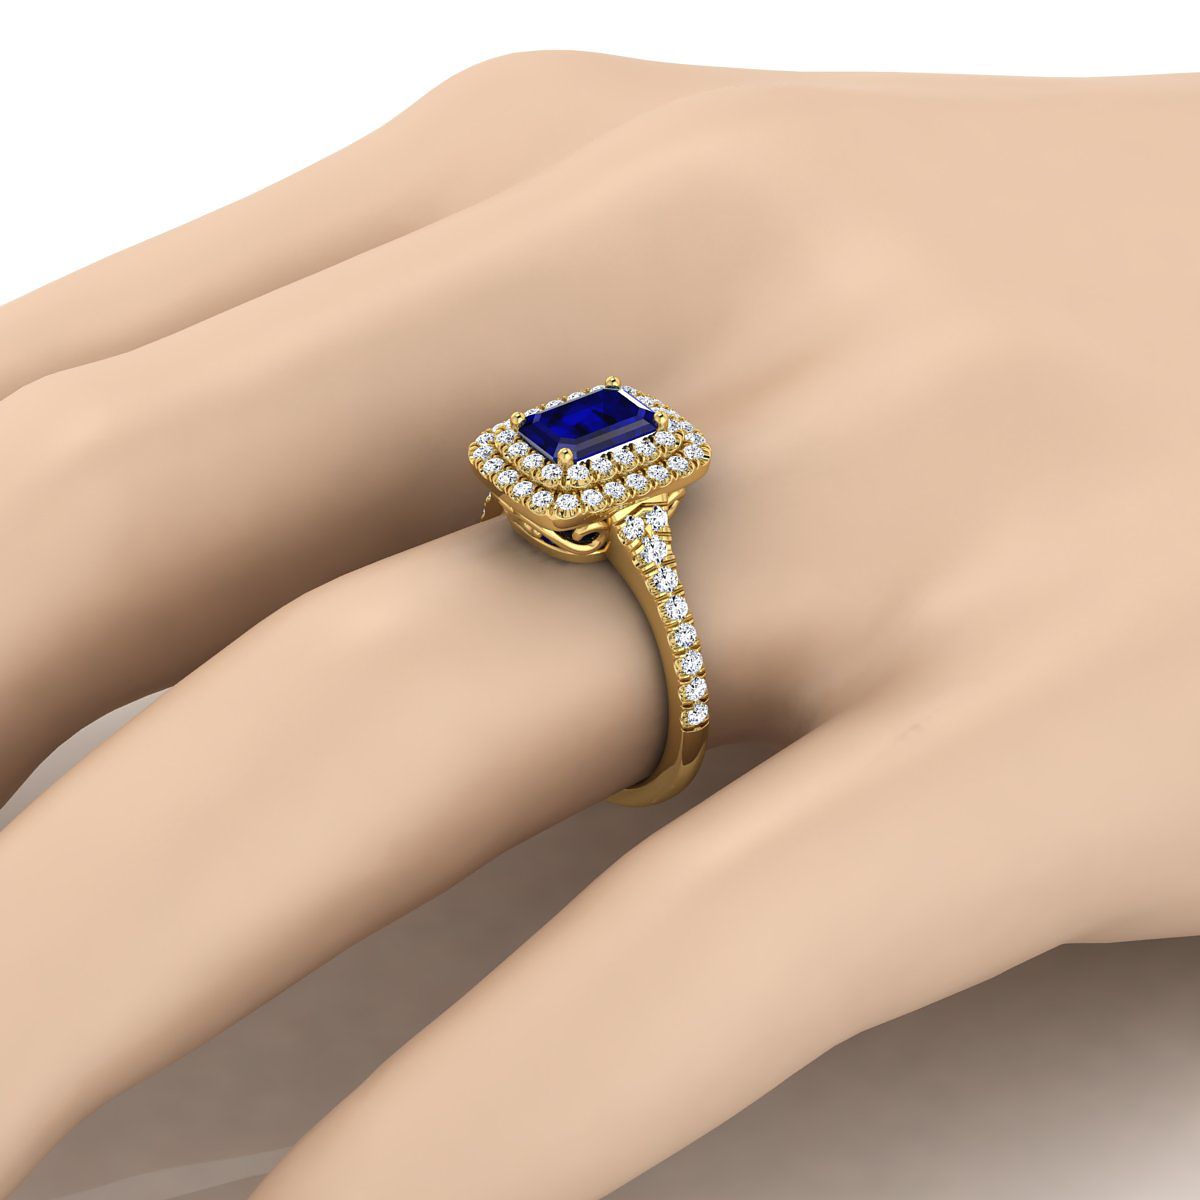 14K Yellow Gold Emerald Cut Sapphire Double Halo with Scalloped Pavé Diamond Engagement Ring -1/2ctw